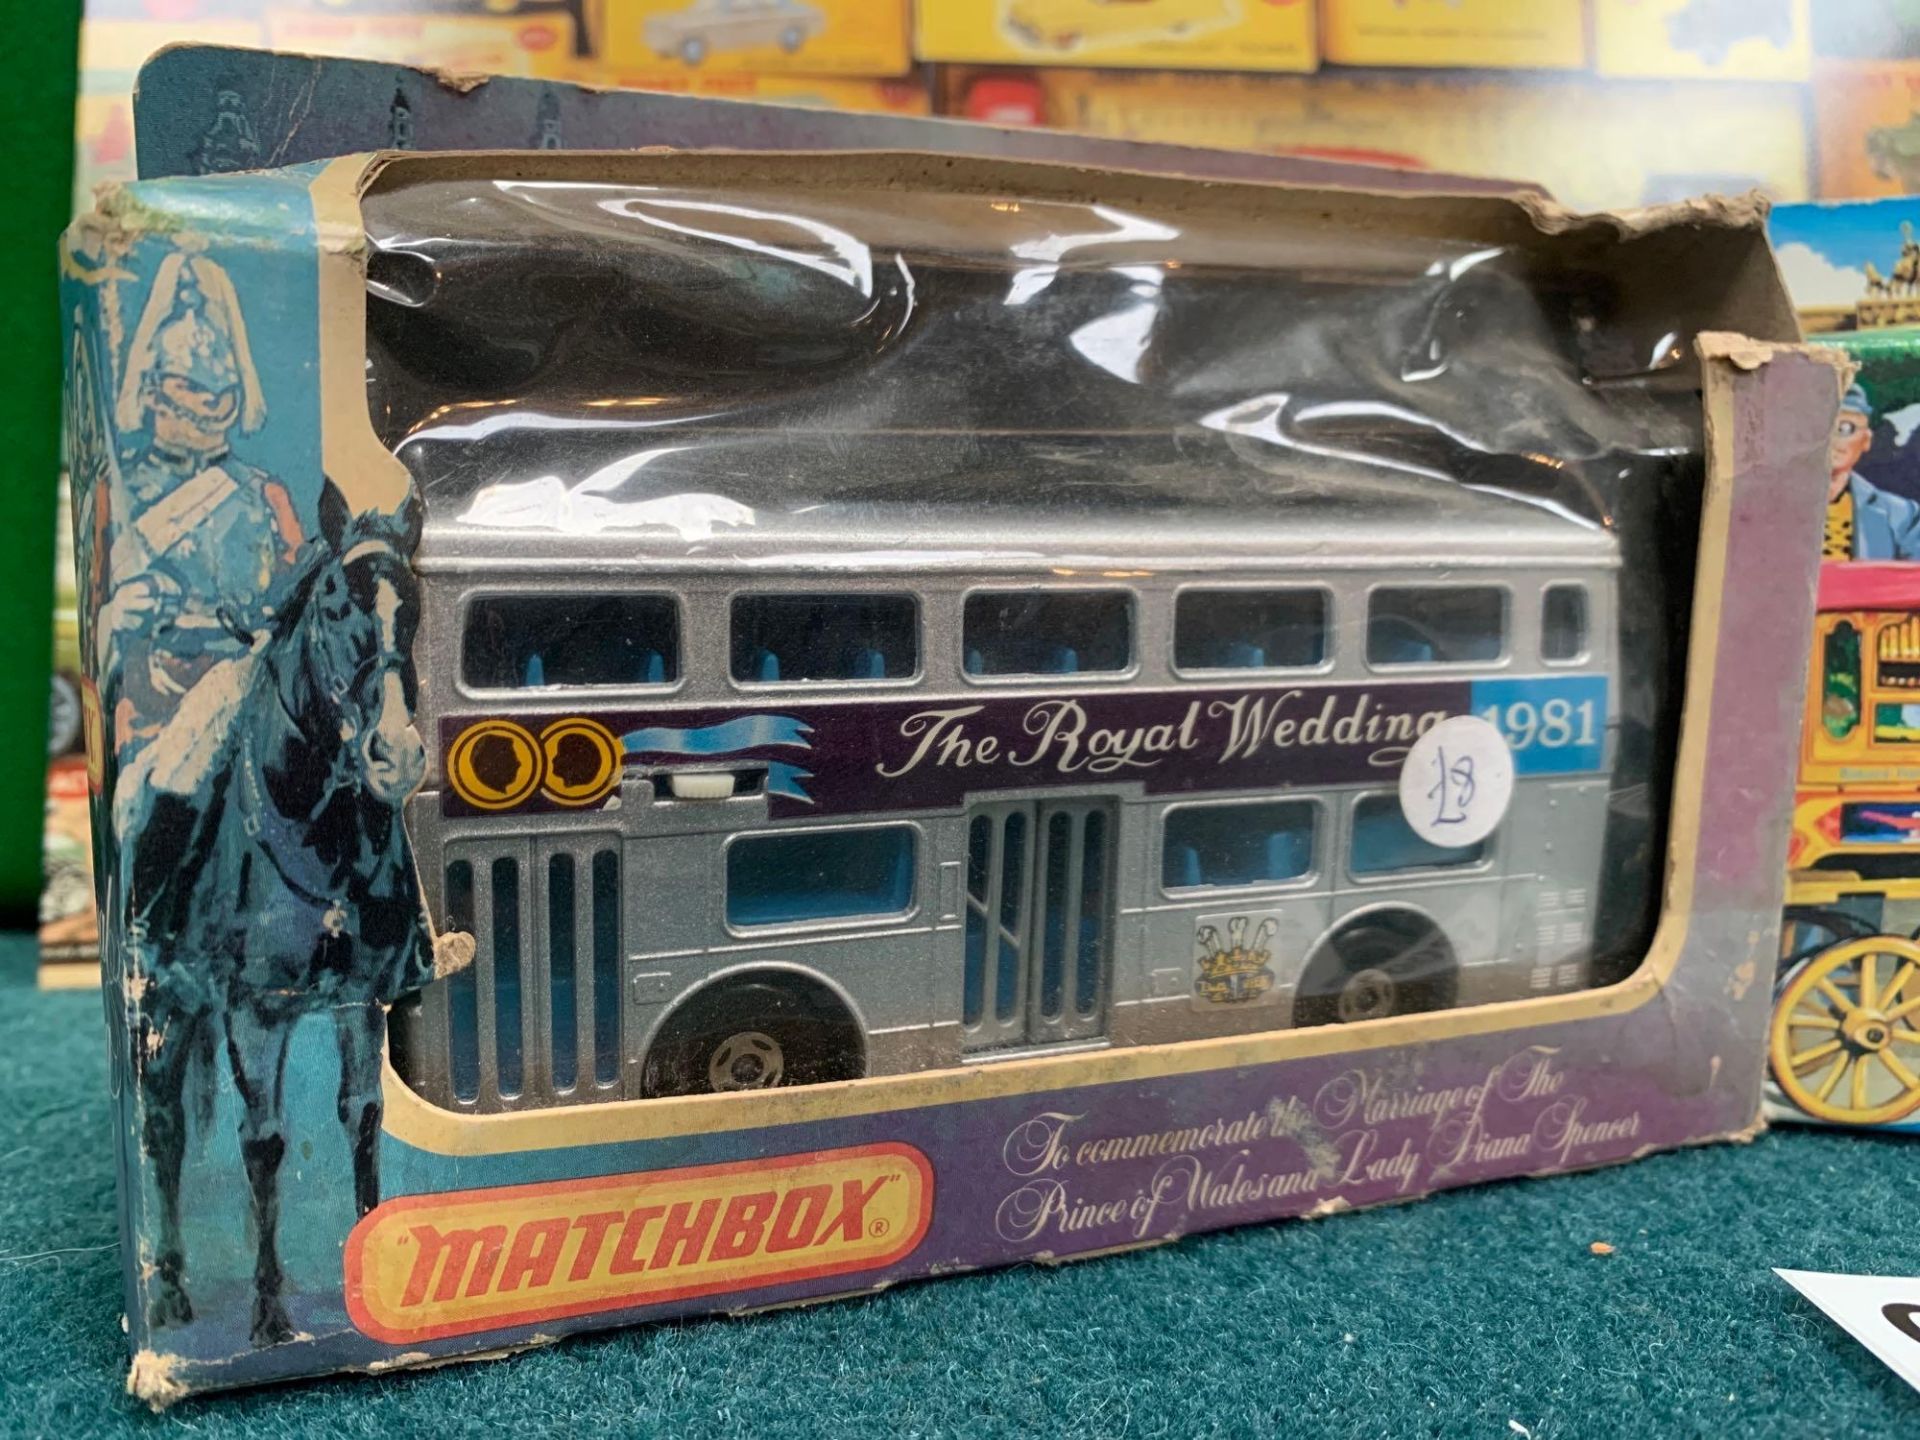 2 X Matchbox Buses The Royal Wedding 1981 To Commemorate The Marriage Of The Prince Of Wales And - Image 3 of 6